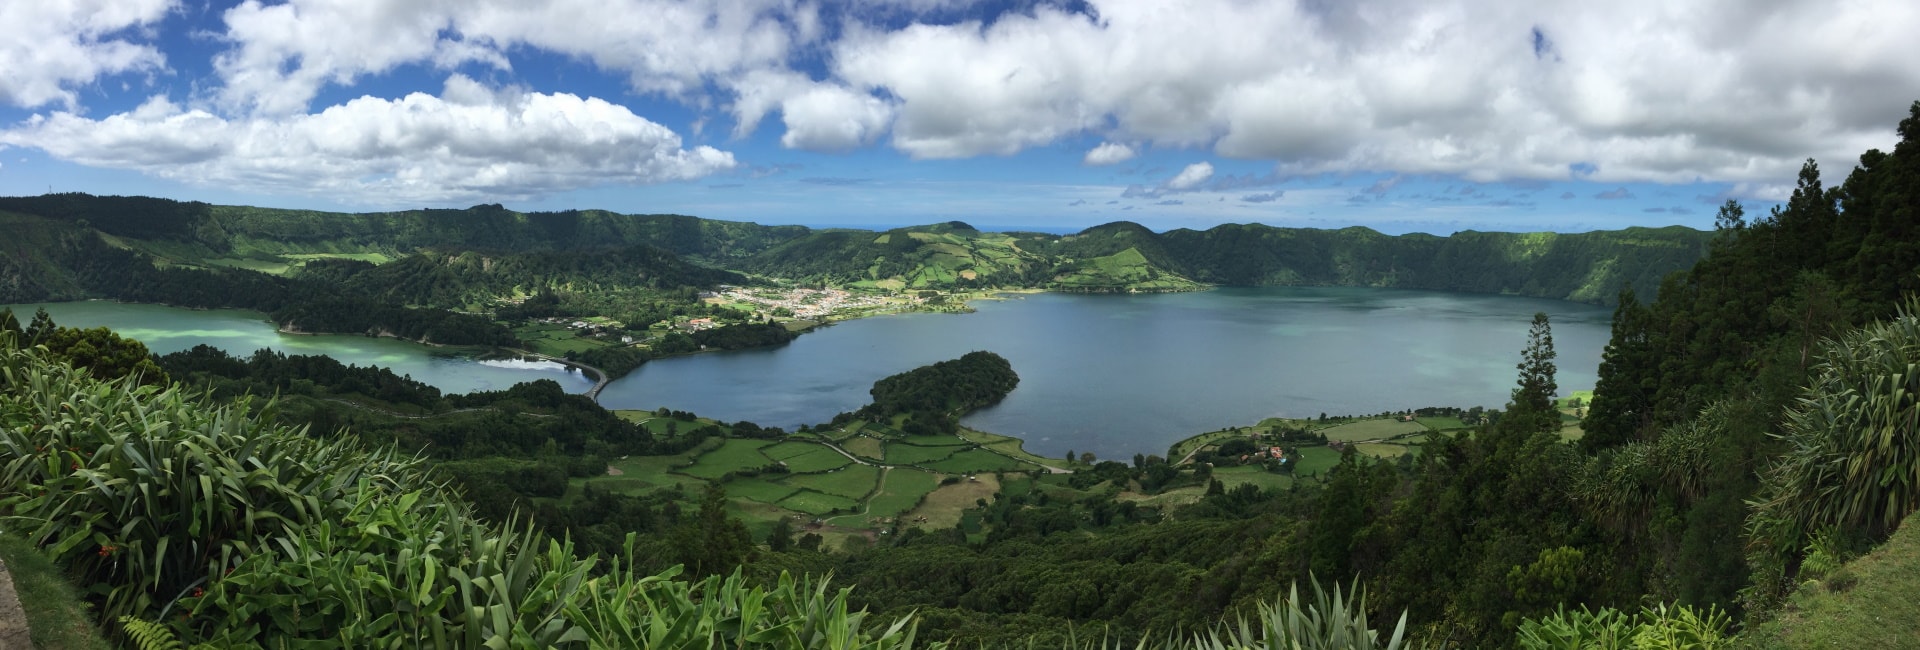 Azores Islands Walking Tour – Dolphins, Hot Springs & Waterfalls